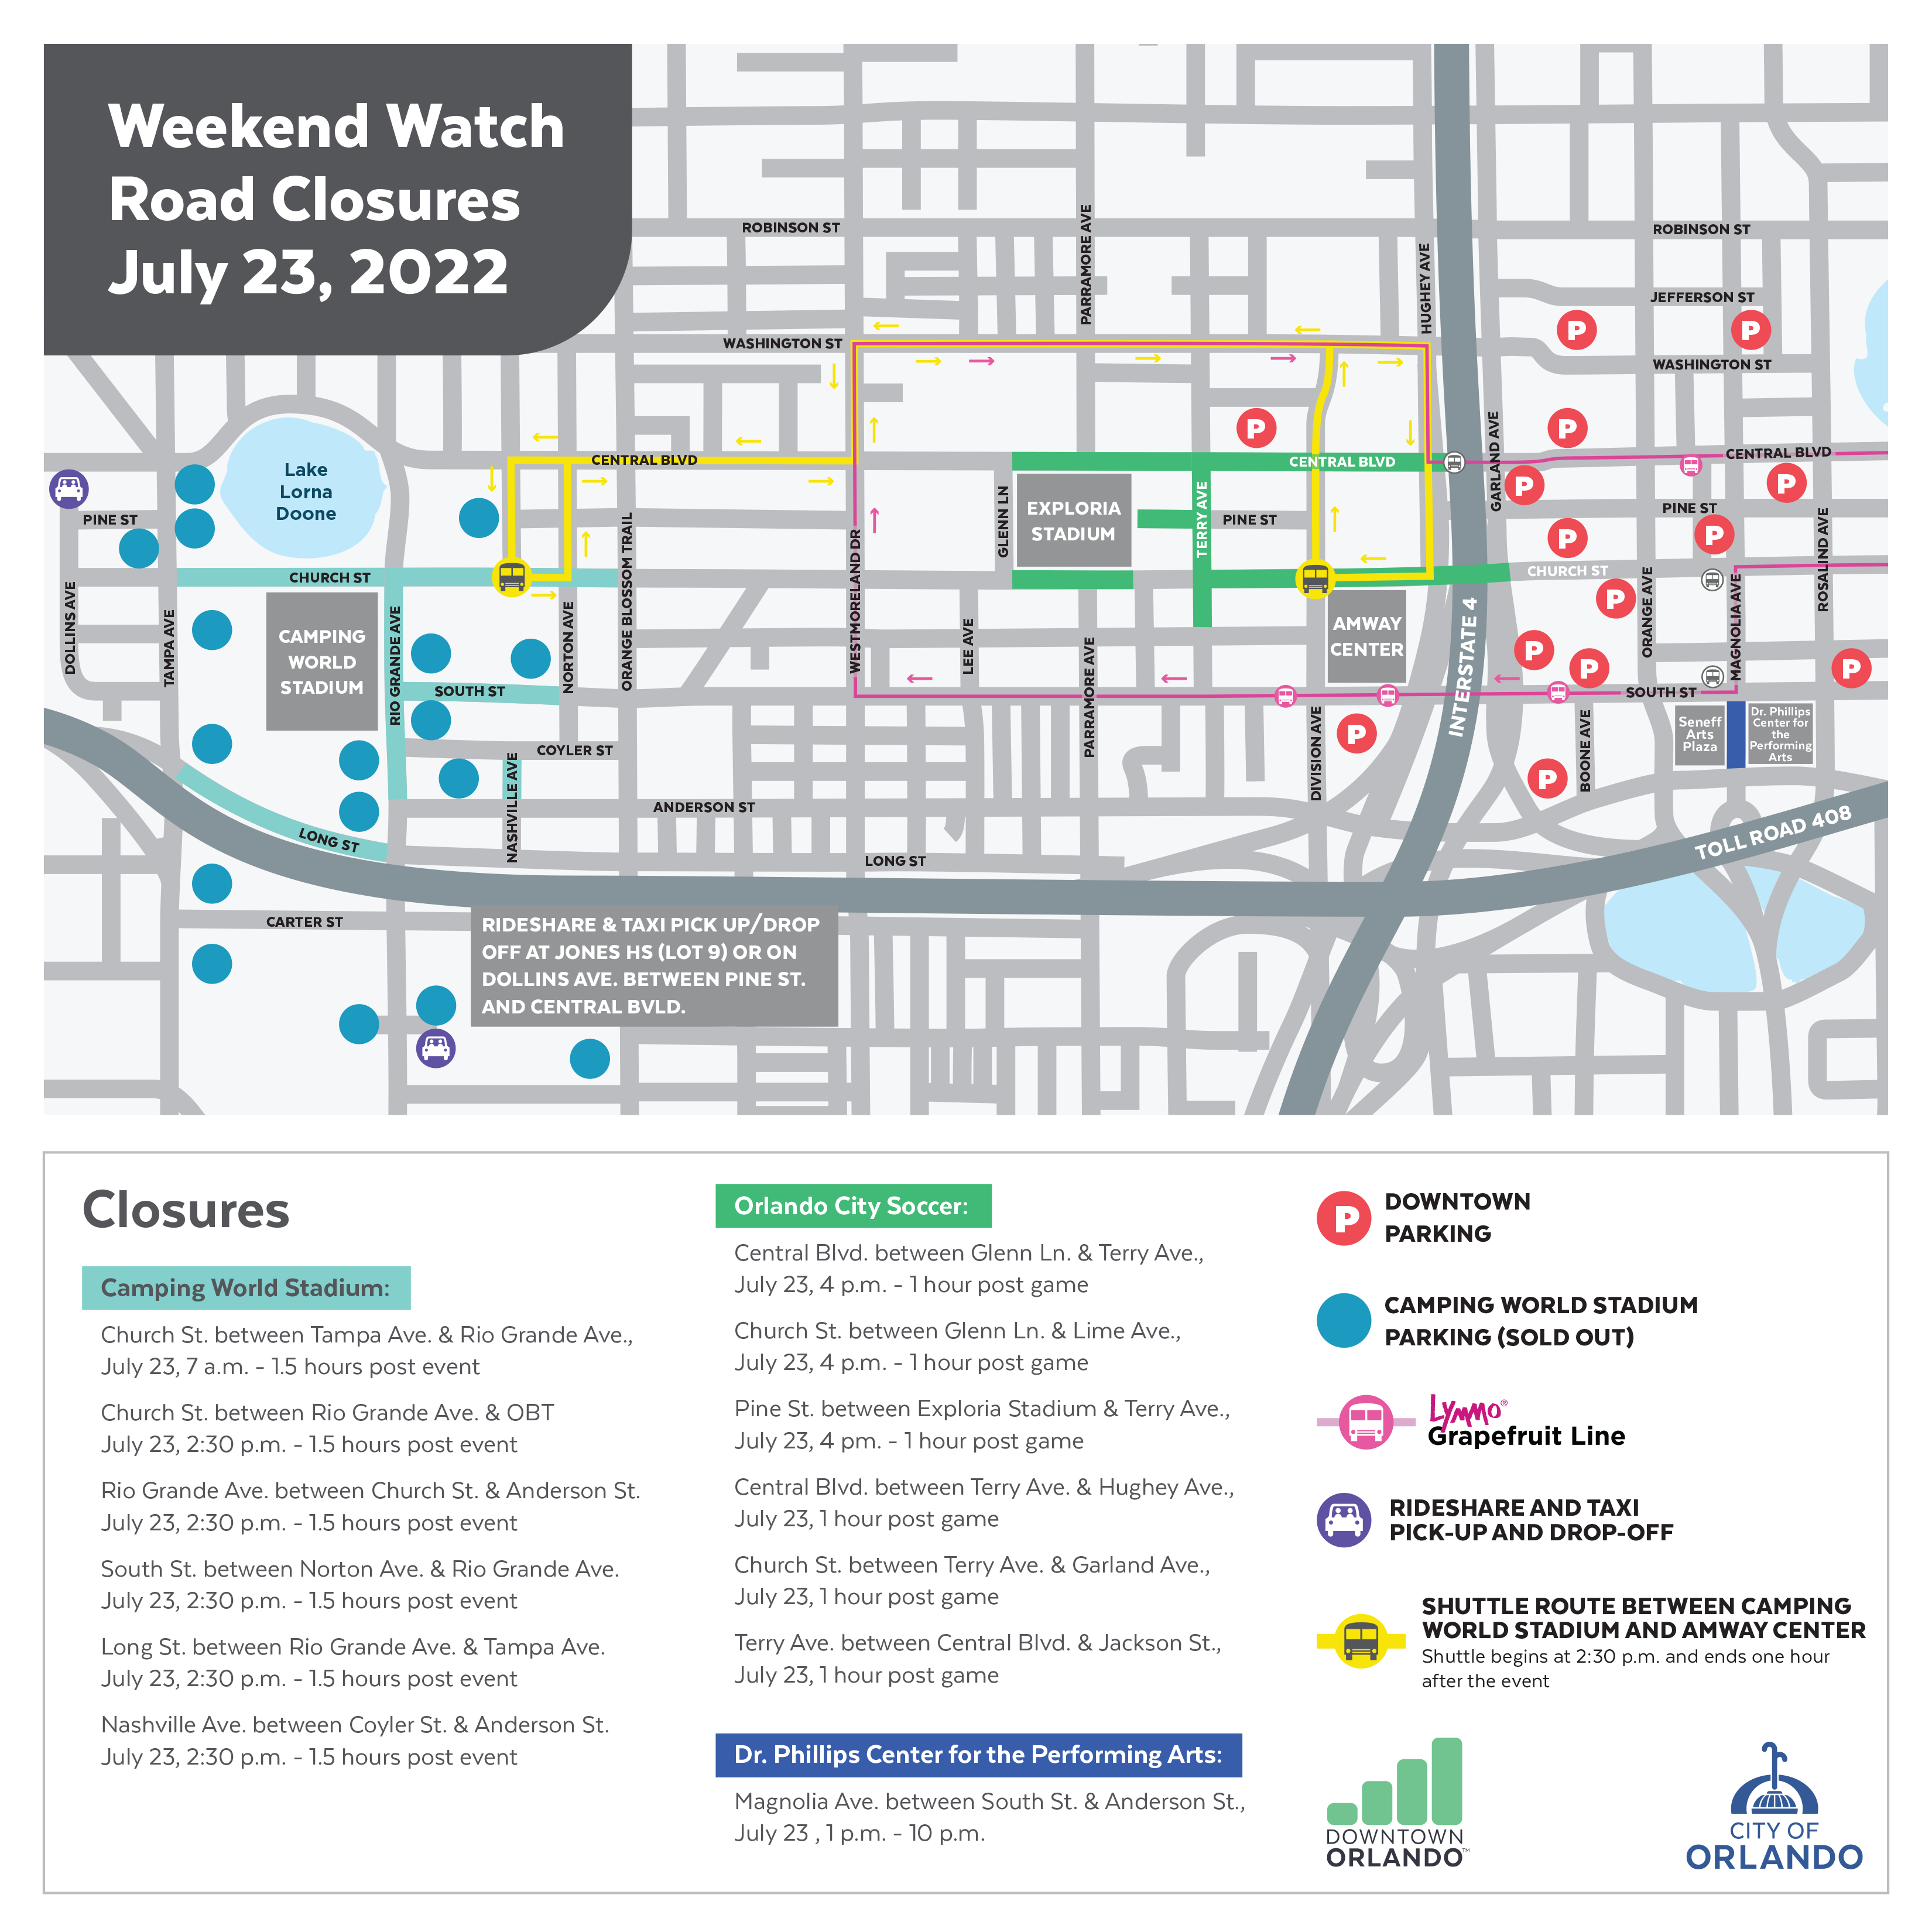 Downtown Orlando Map with Parking and Road Closures